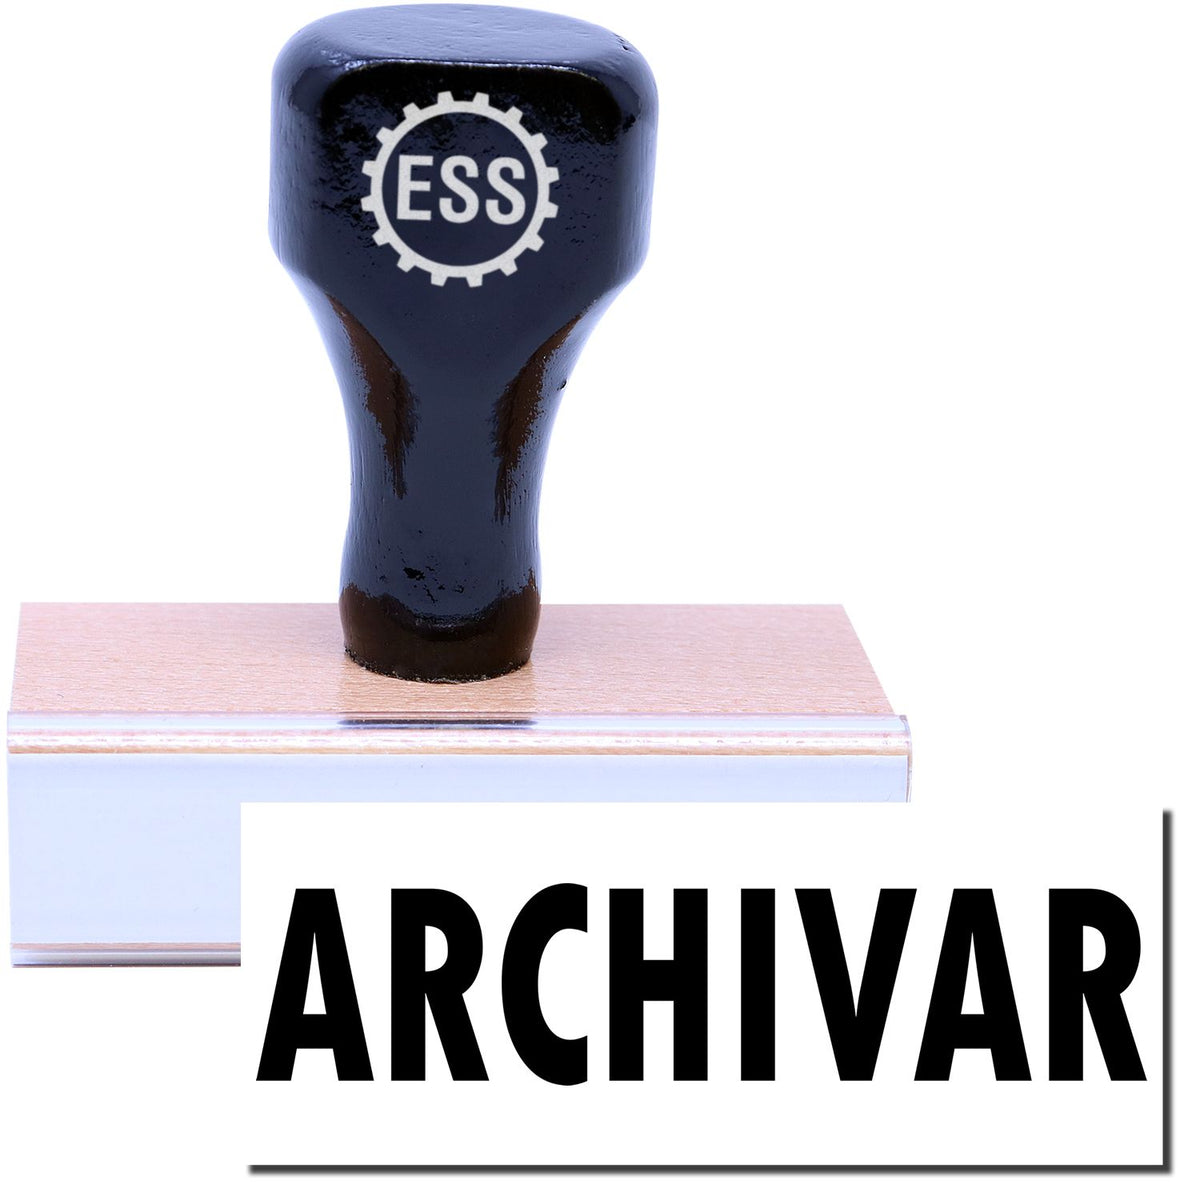 A stock office rubber stamp with a stamped image showing how the text &quot;ARCHIVAR&quot; is displayed after stamping.